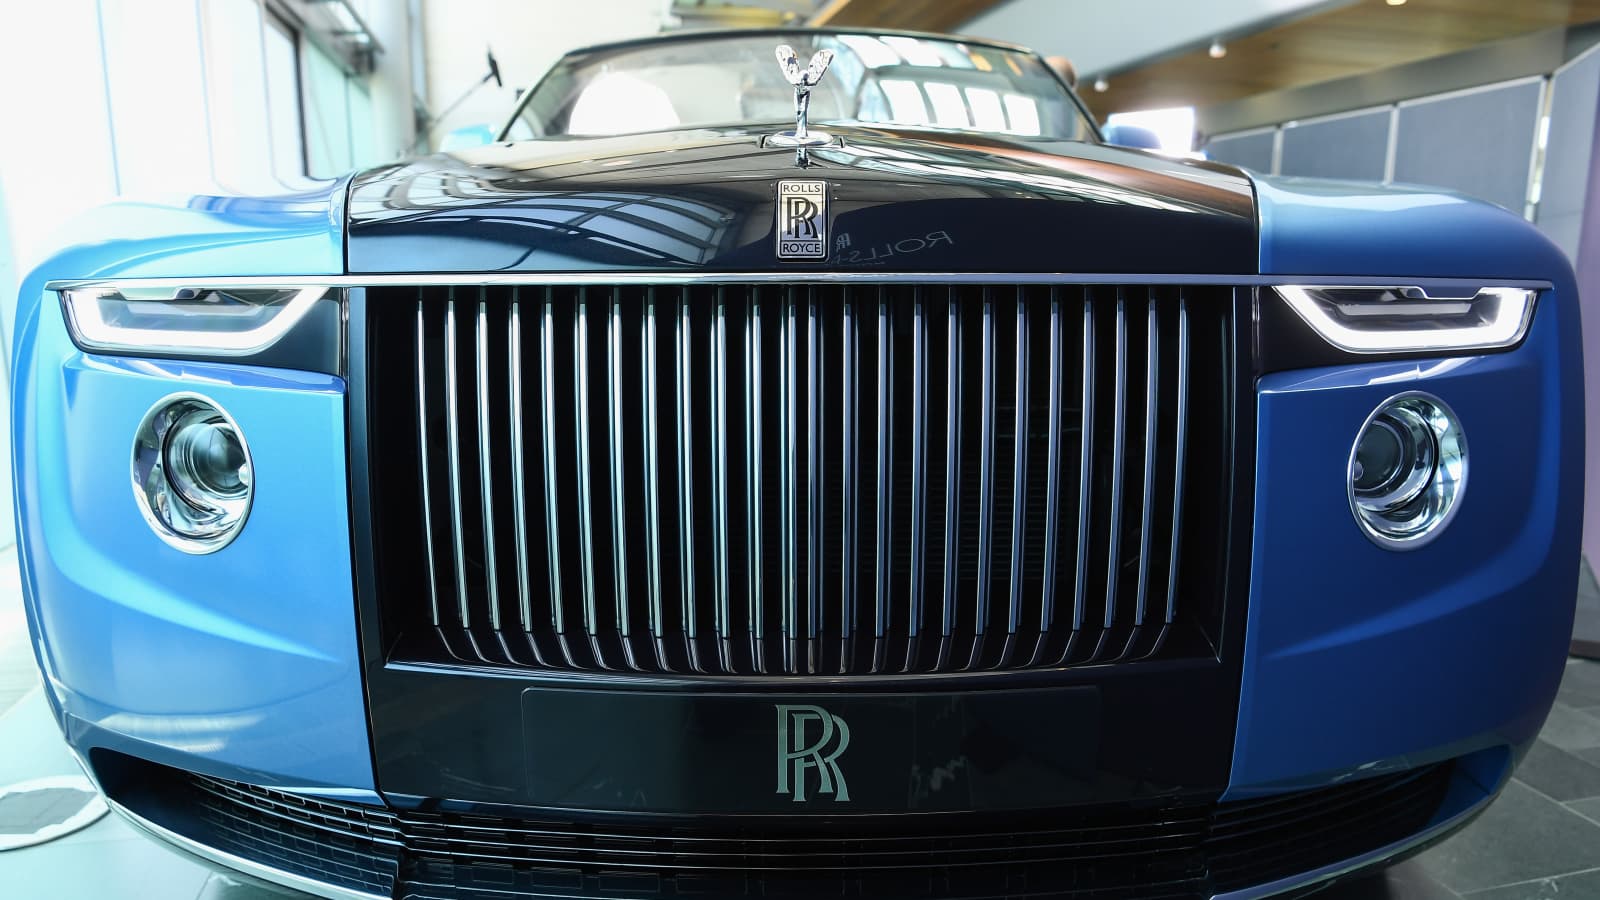 Why Is the Rolls-Royce Boat Tail the Most Expensive Car?